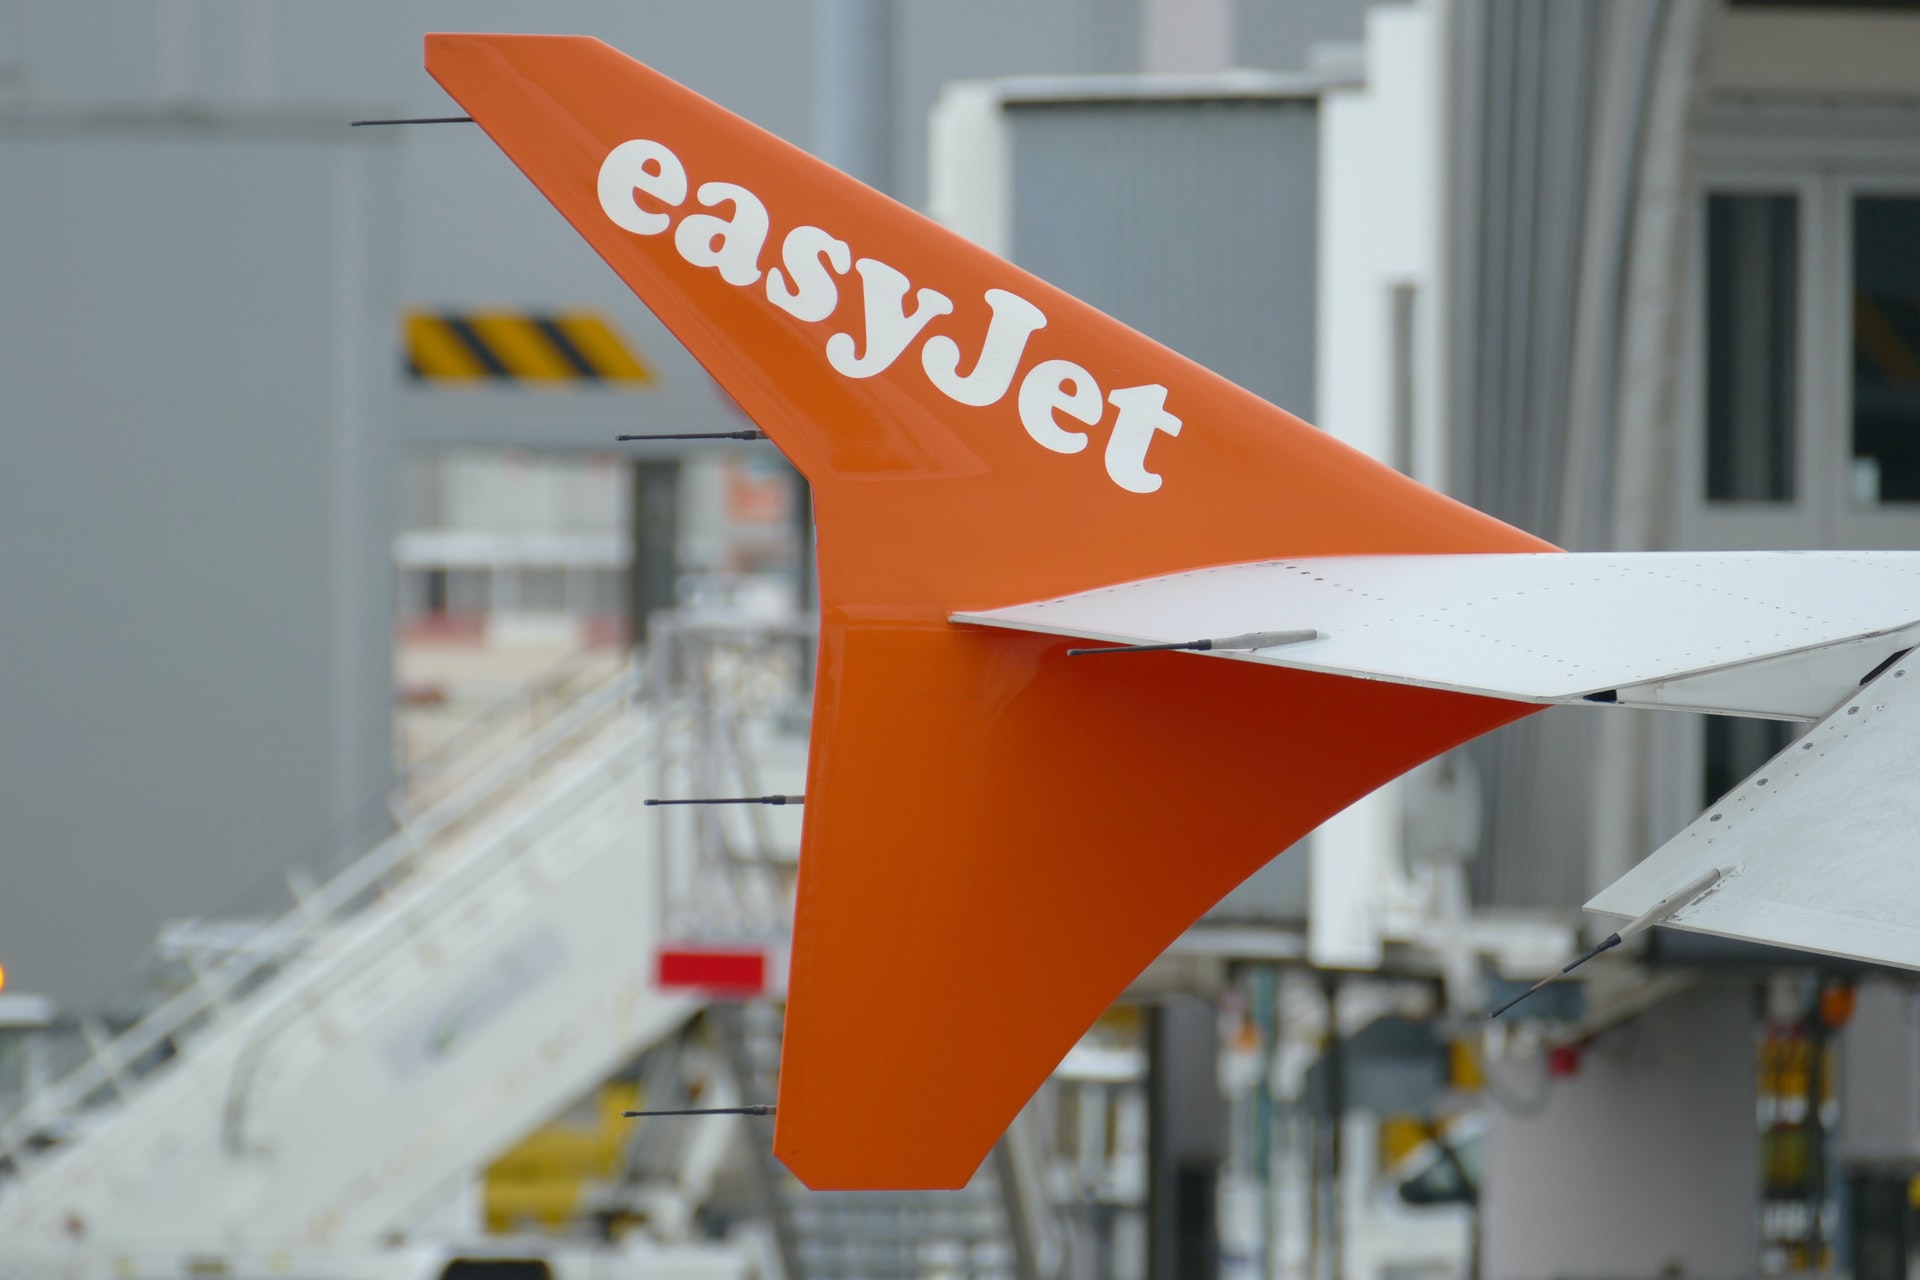 An airline which was involved in a cybersecurity attack: EasyJet